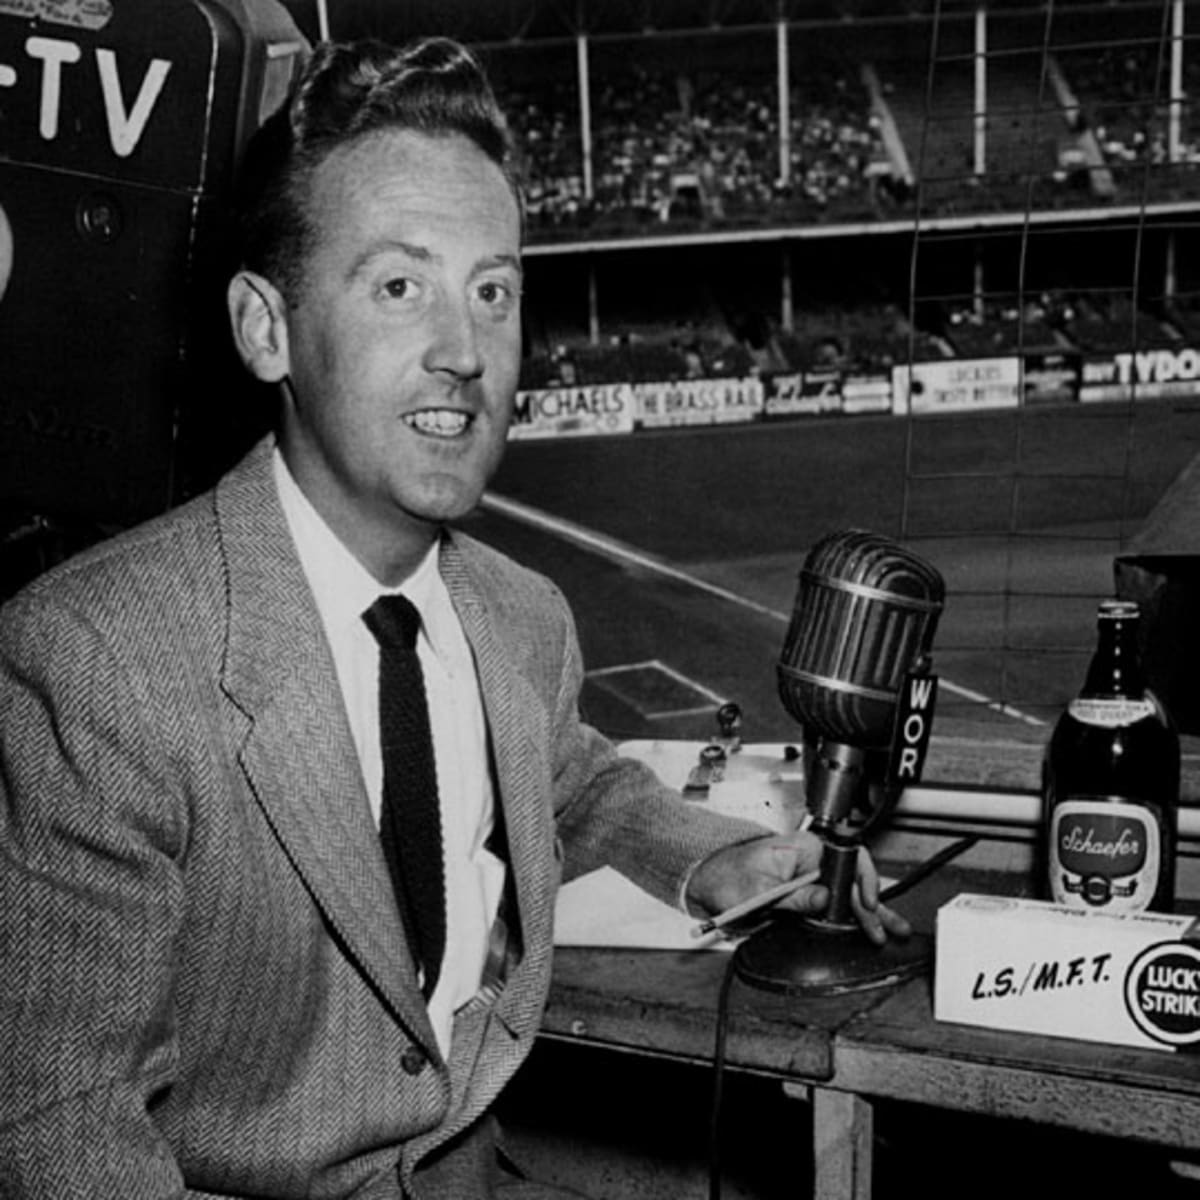 One last season with Vin Scully, voice of the Dodgers